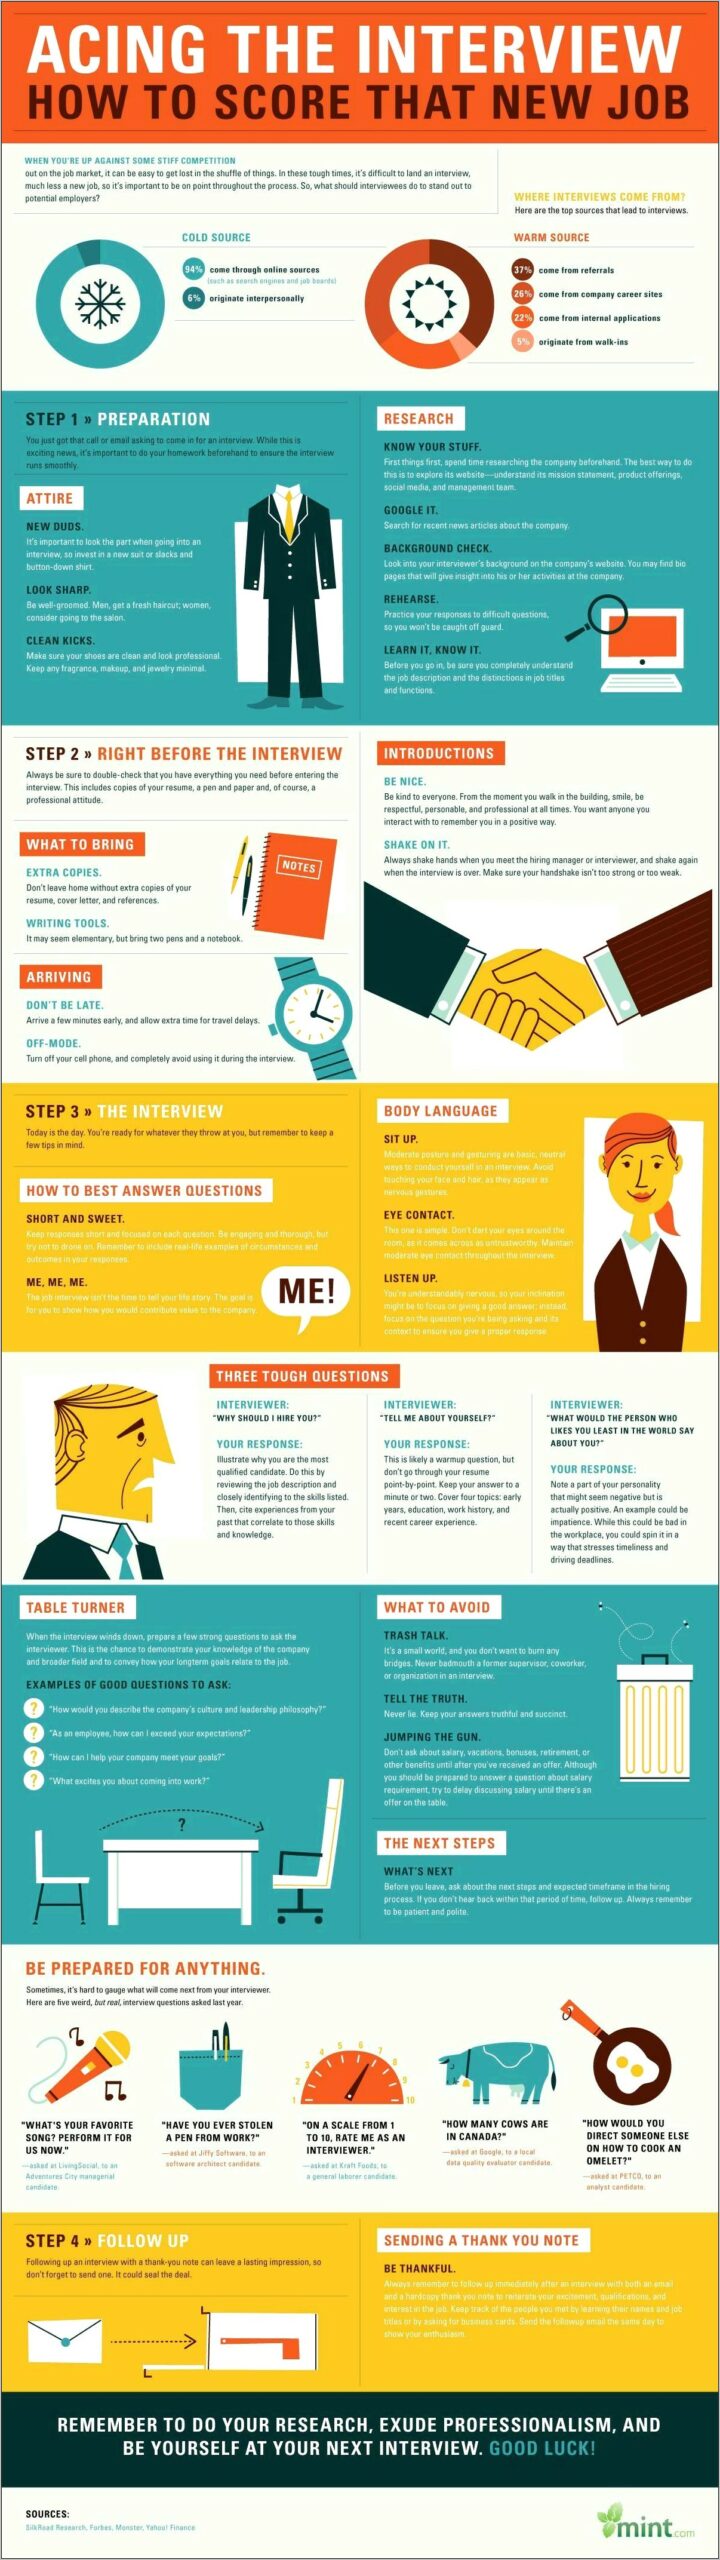 Resume And Job Interview Tips